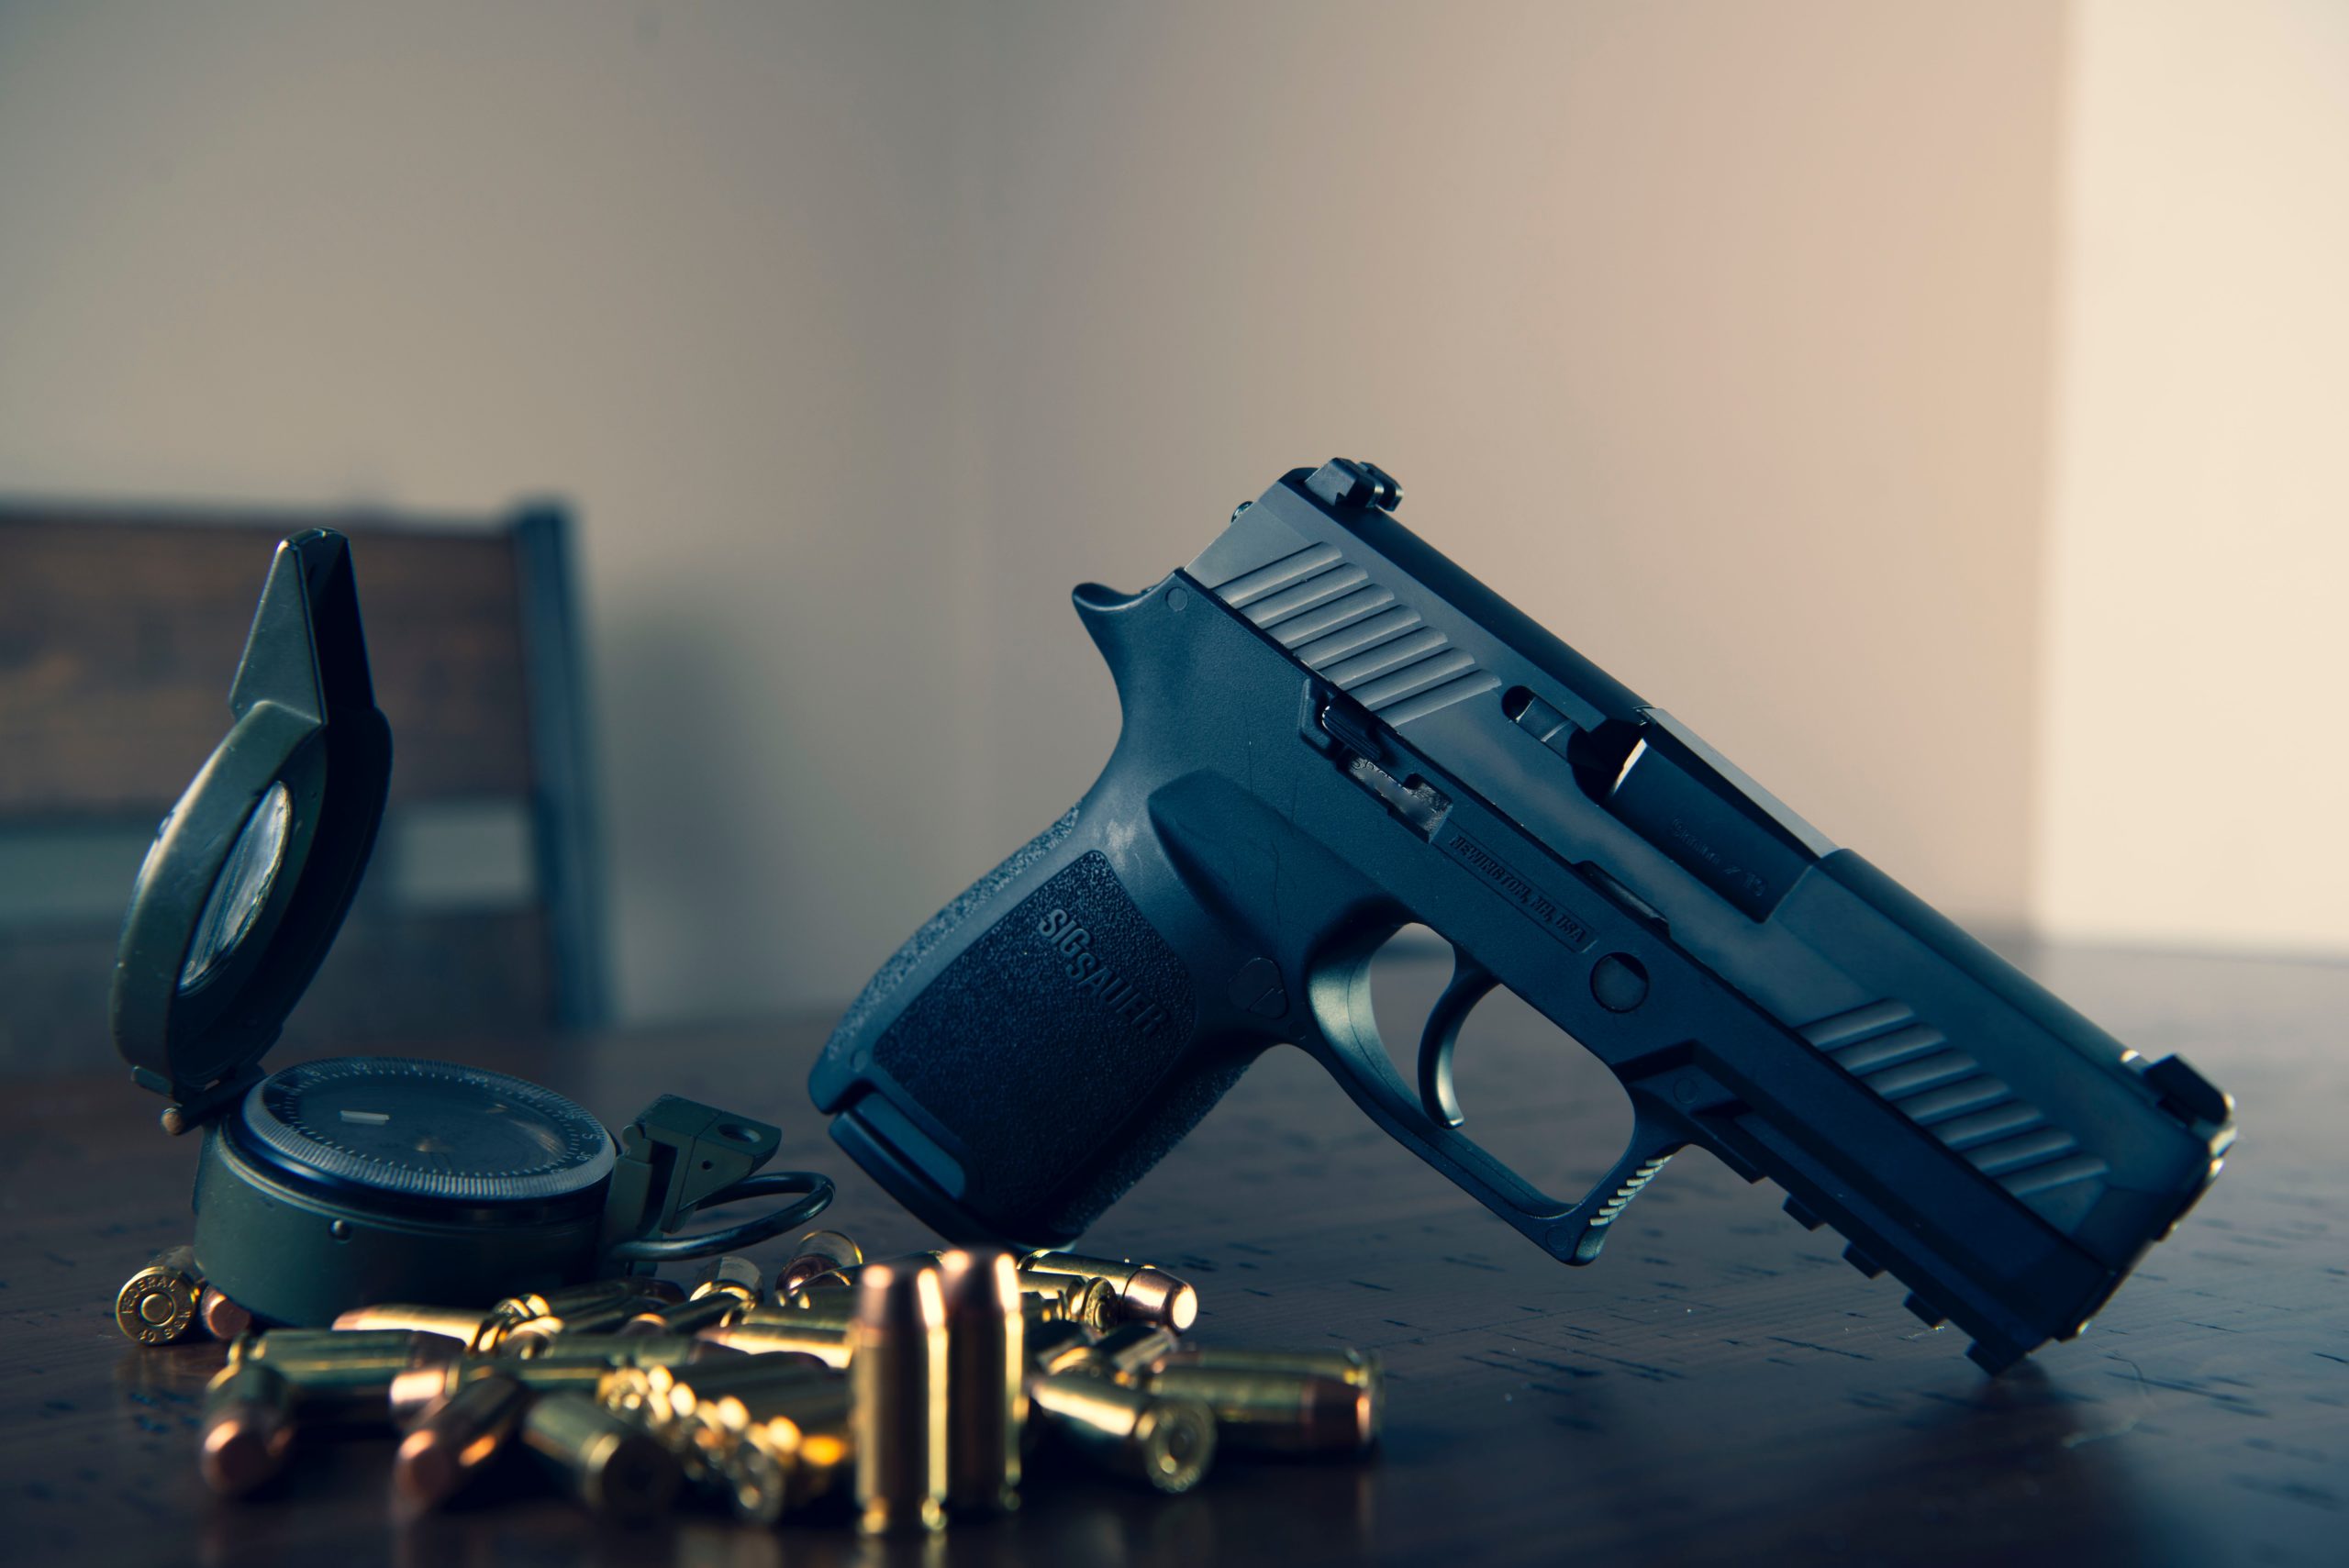 A handgun lies on a wooden surface with scattered bullets and a compass next to it, suggesting themes of travel and security. The setting is dimly lit, emphasizing a dramatic atmosphere potentially linked to gun laws